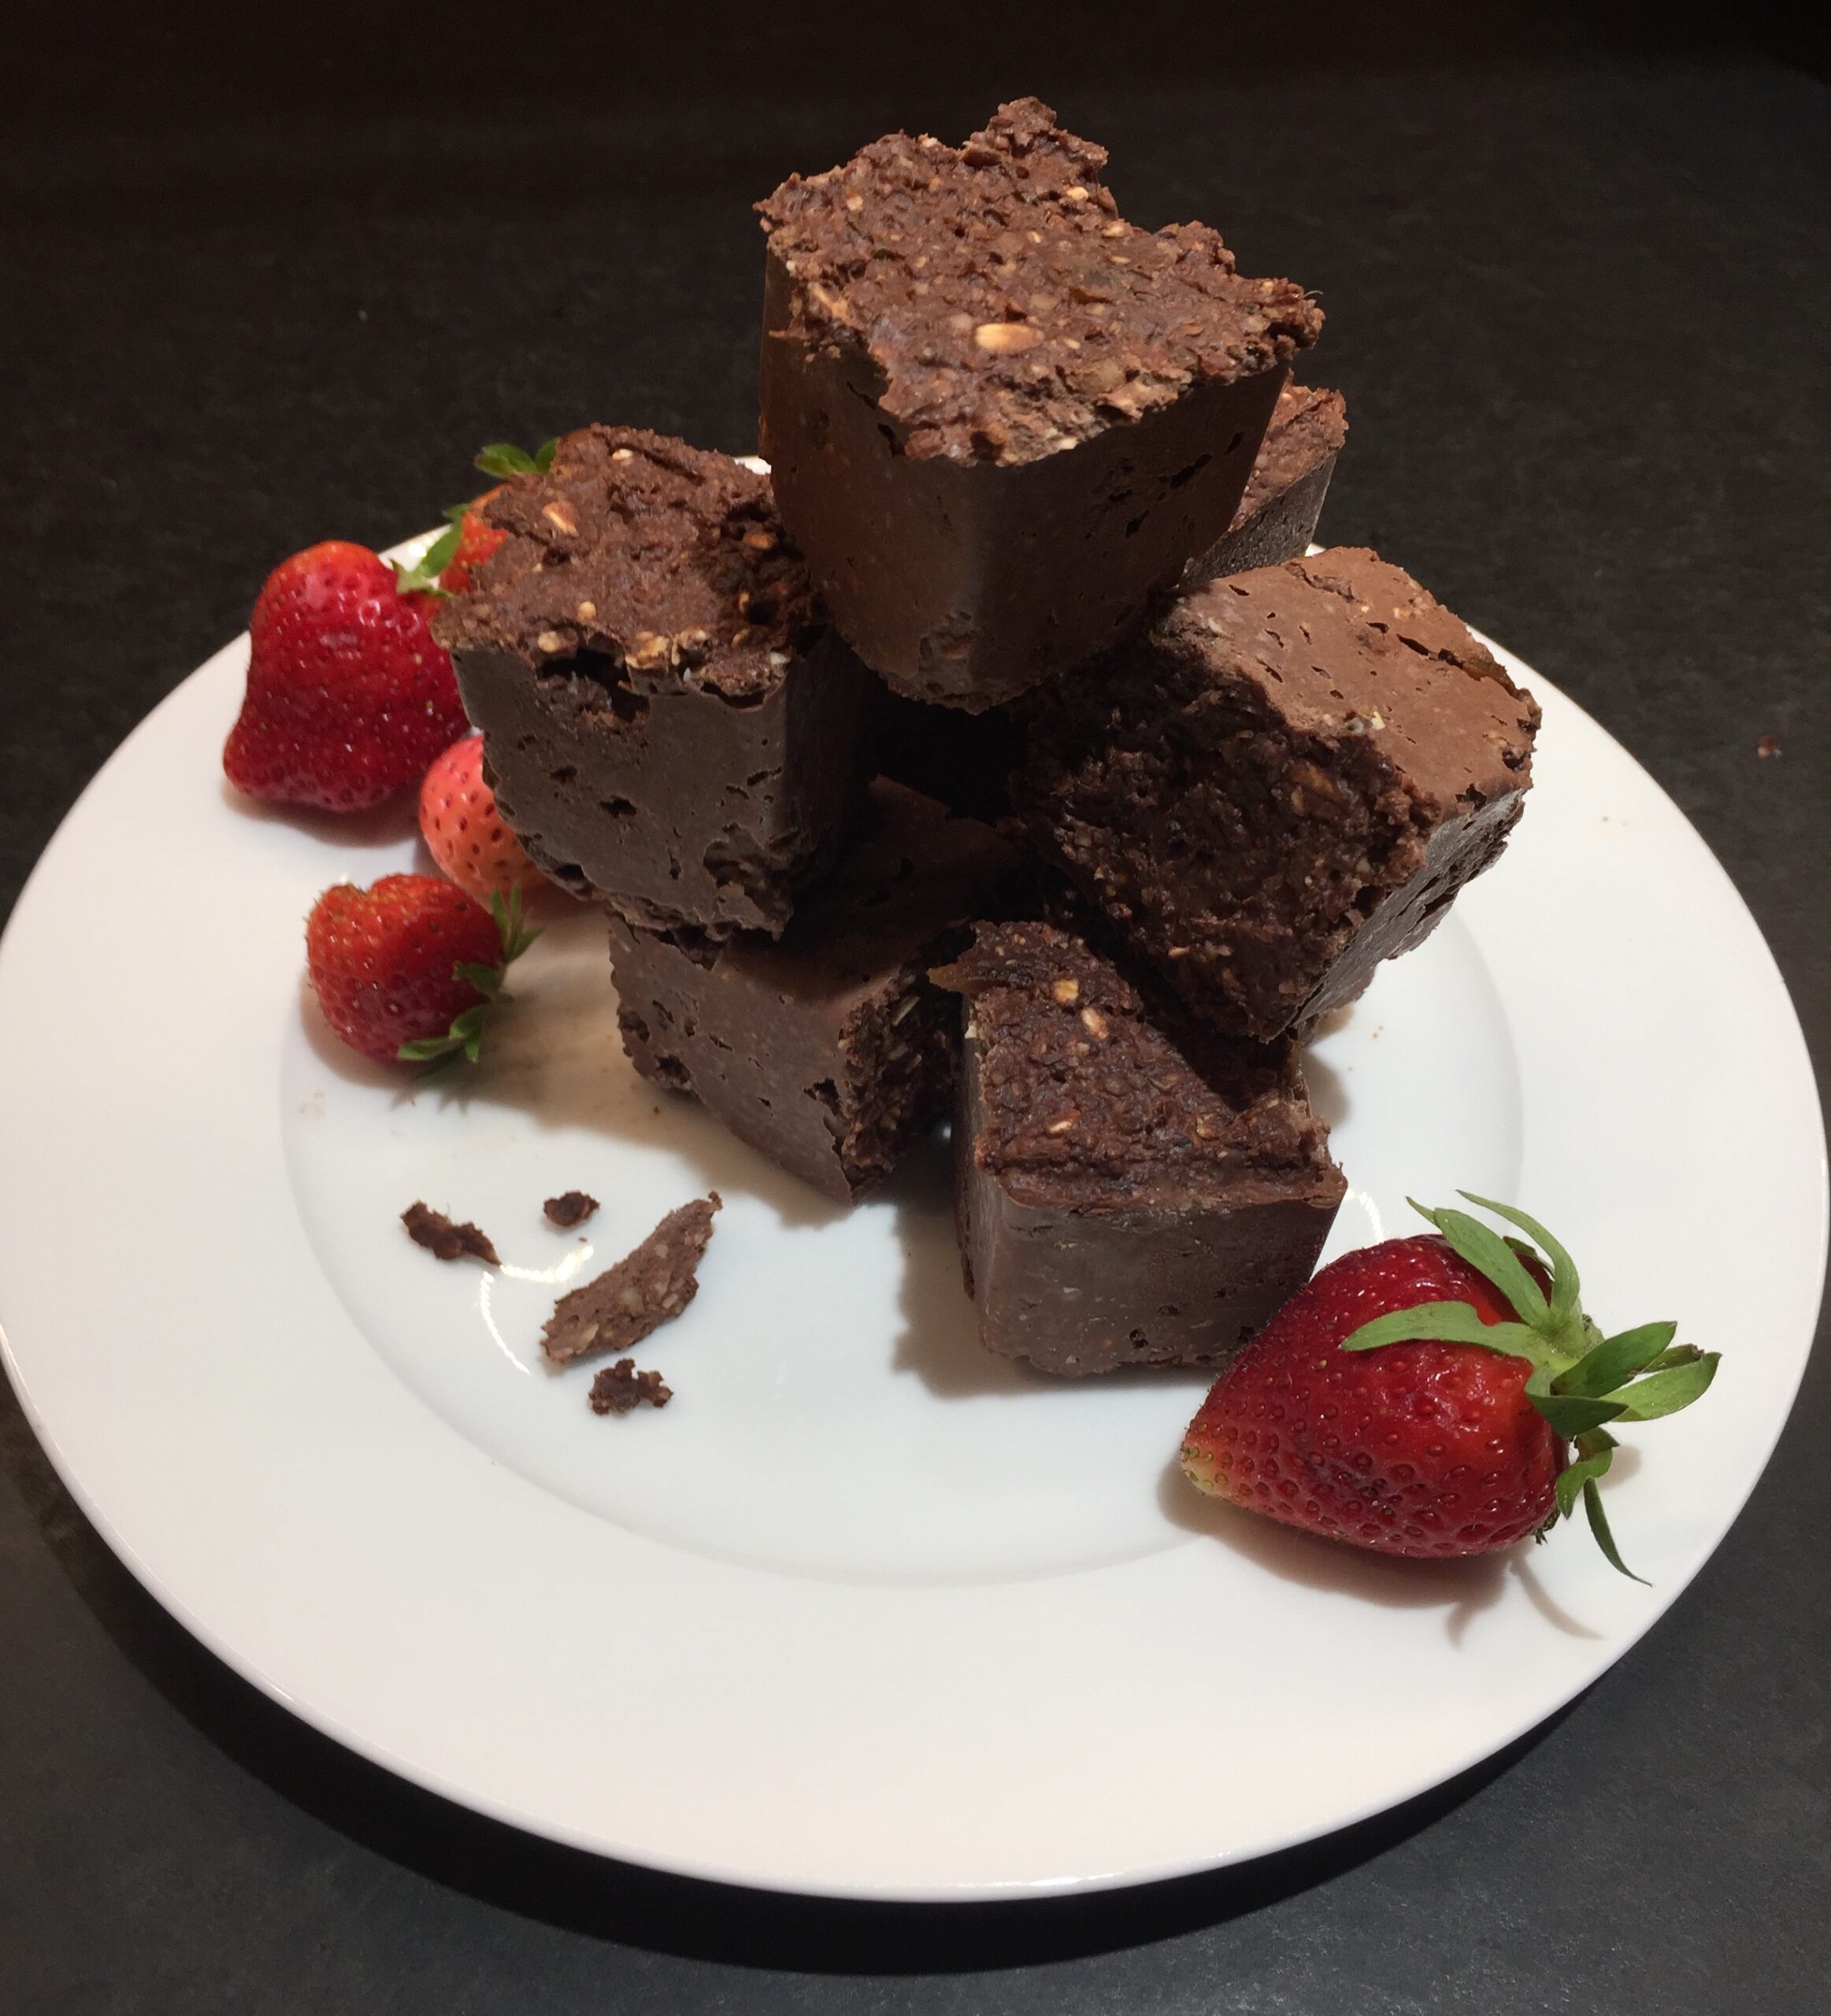 Brownie squares piled on top of each other tall on top of a white plate with strawberries on the side.